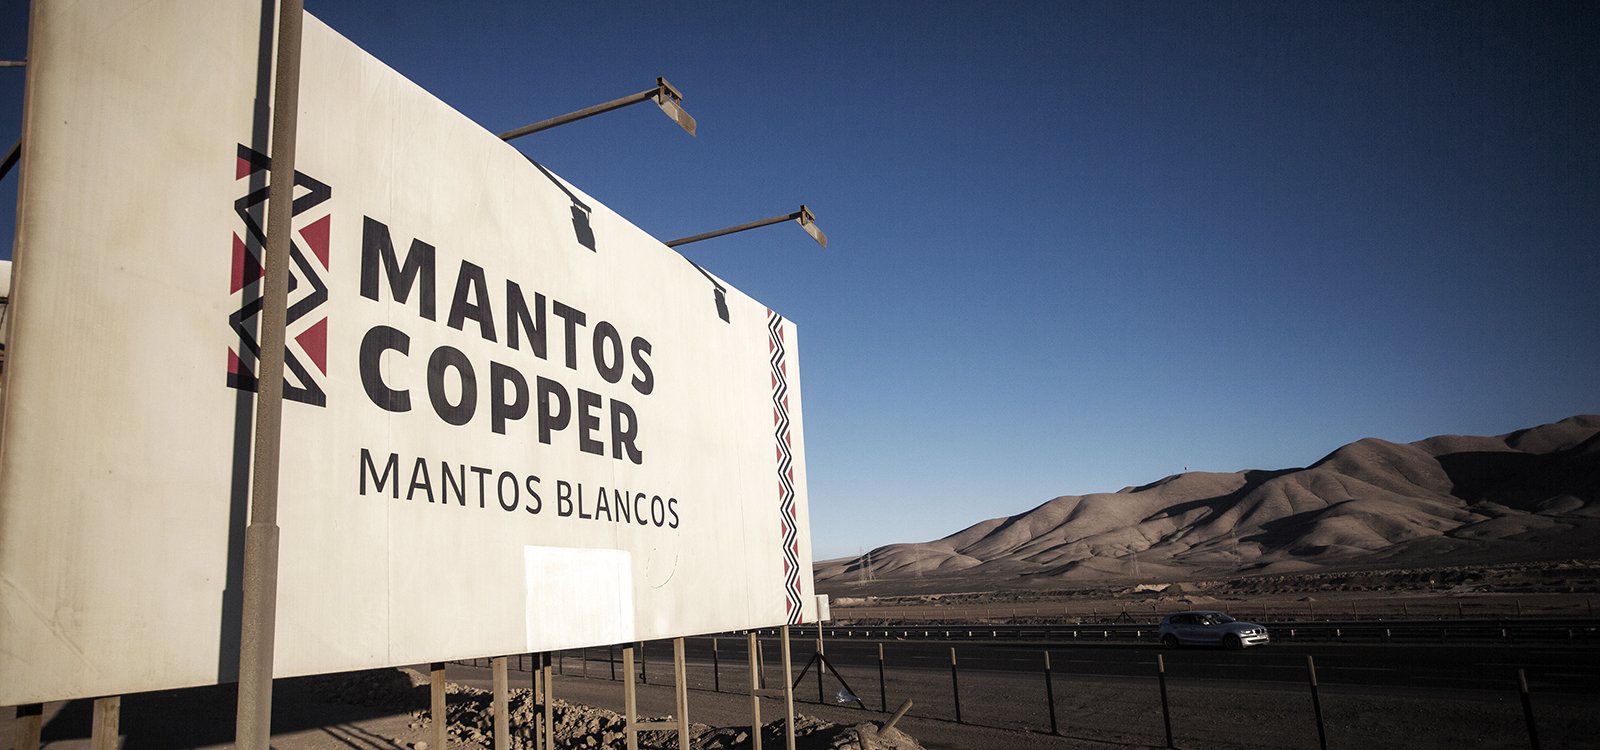 Mantos Blancos sits 800 metres above sea level in the Atacama Desert, one of the most arid places on the planet.